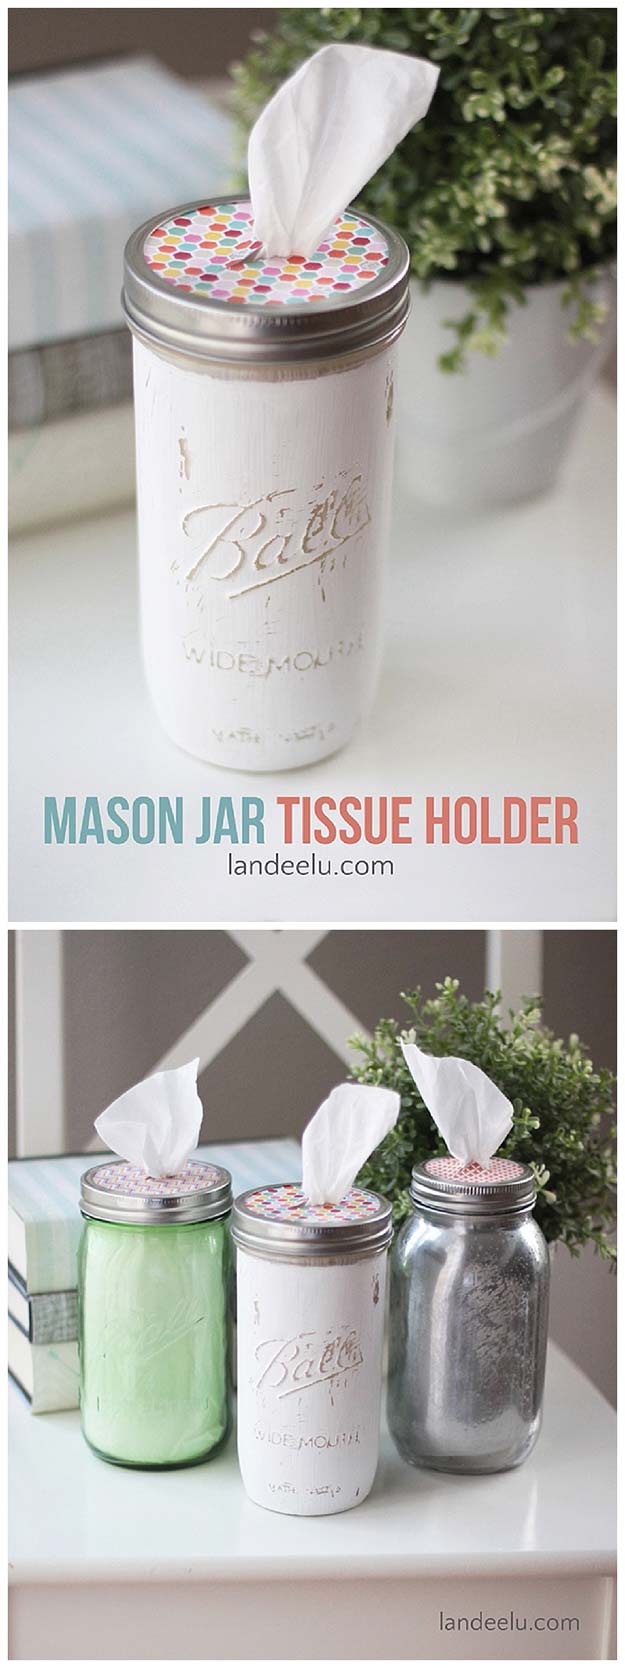 DIY Bathroom Decor Ideas for Teens - Mason Jar Tissue Holder - Best Creative, Cool Bath Decorations and Accessories for Teenagers - Easy, Cheap, Cute and Quick Craft Projects That Are Fun To Make. Easy to Follow Step by Step Tutorials 